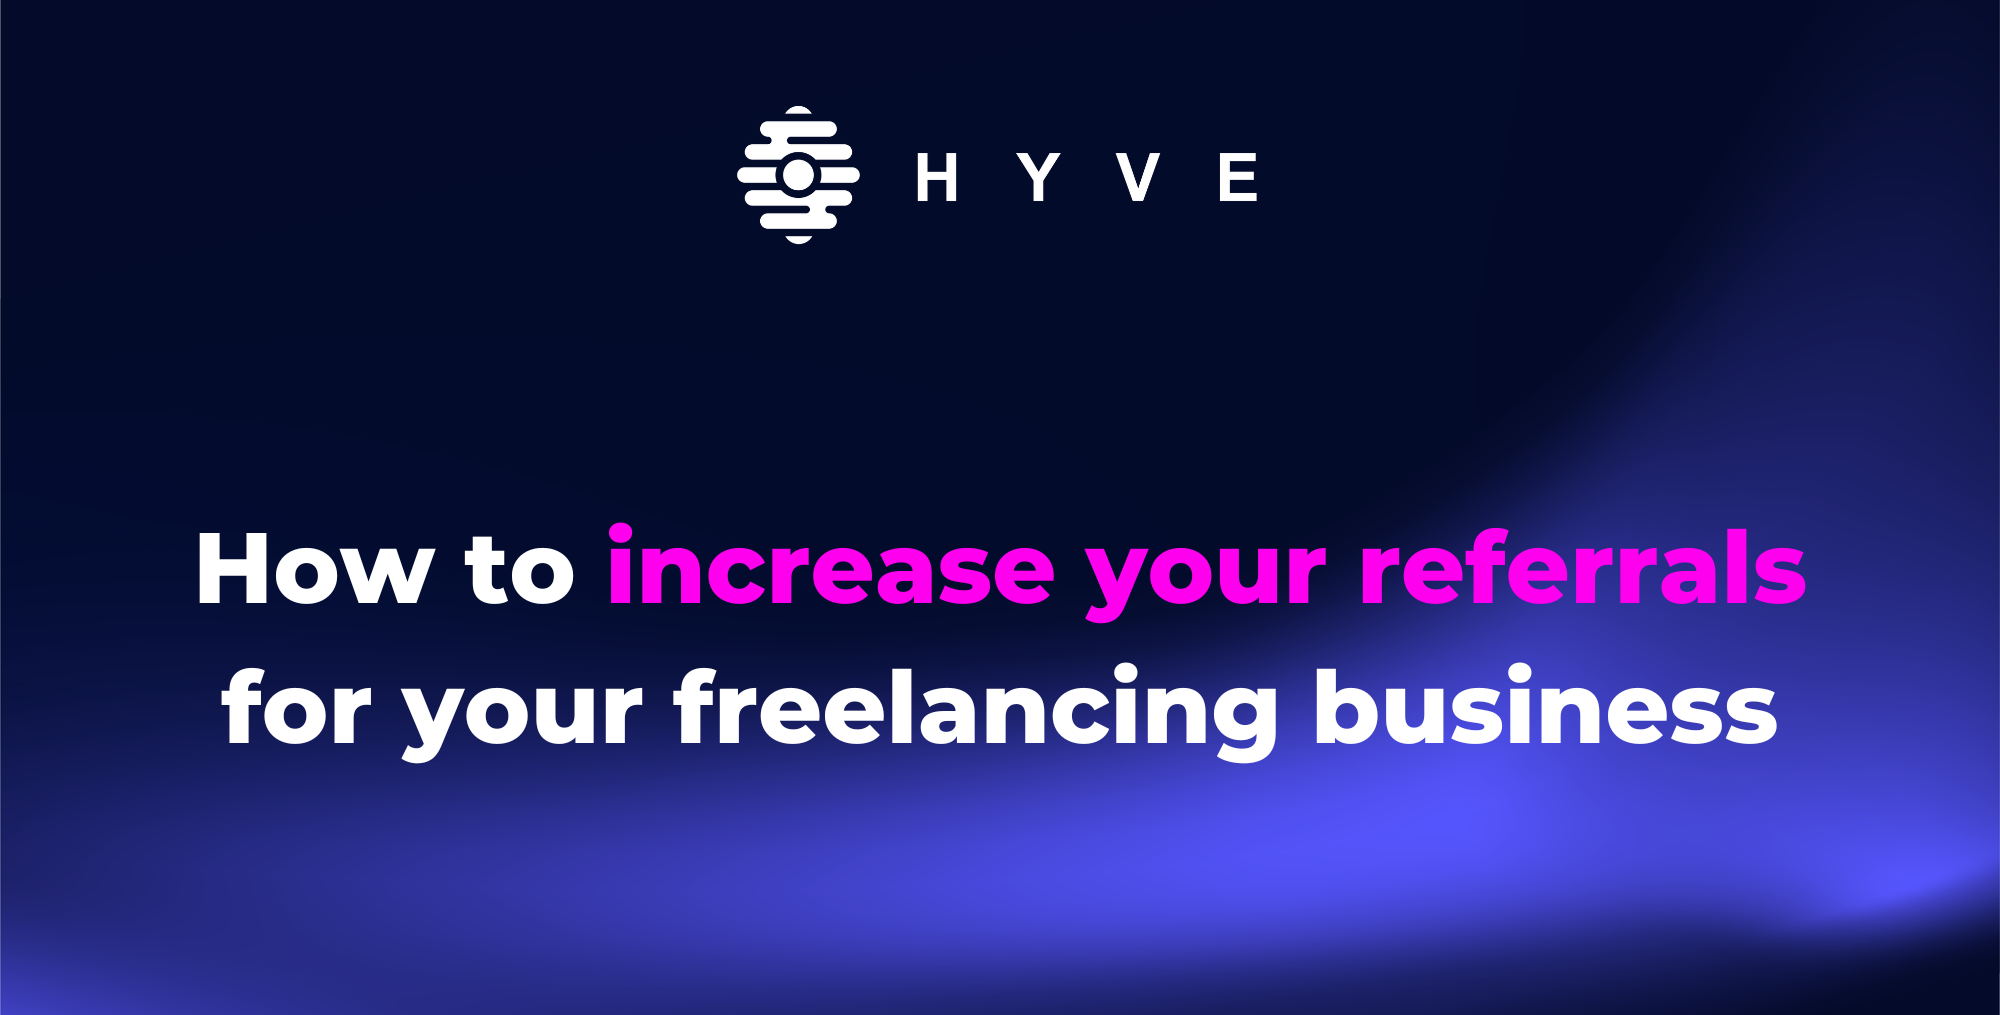 How to increase your referrals for your freelancing business